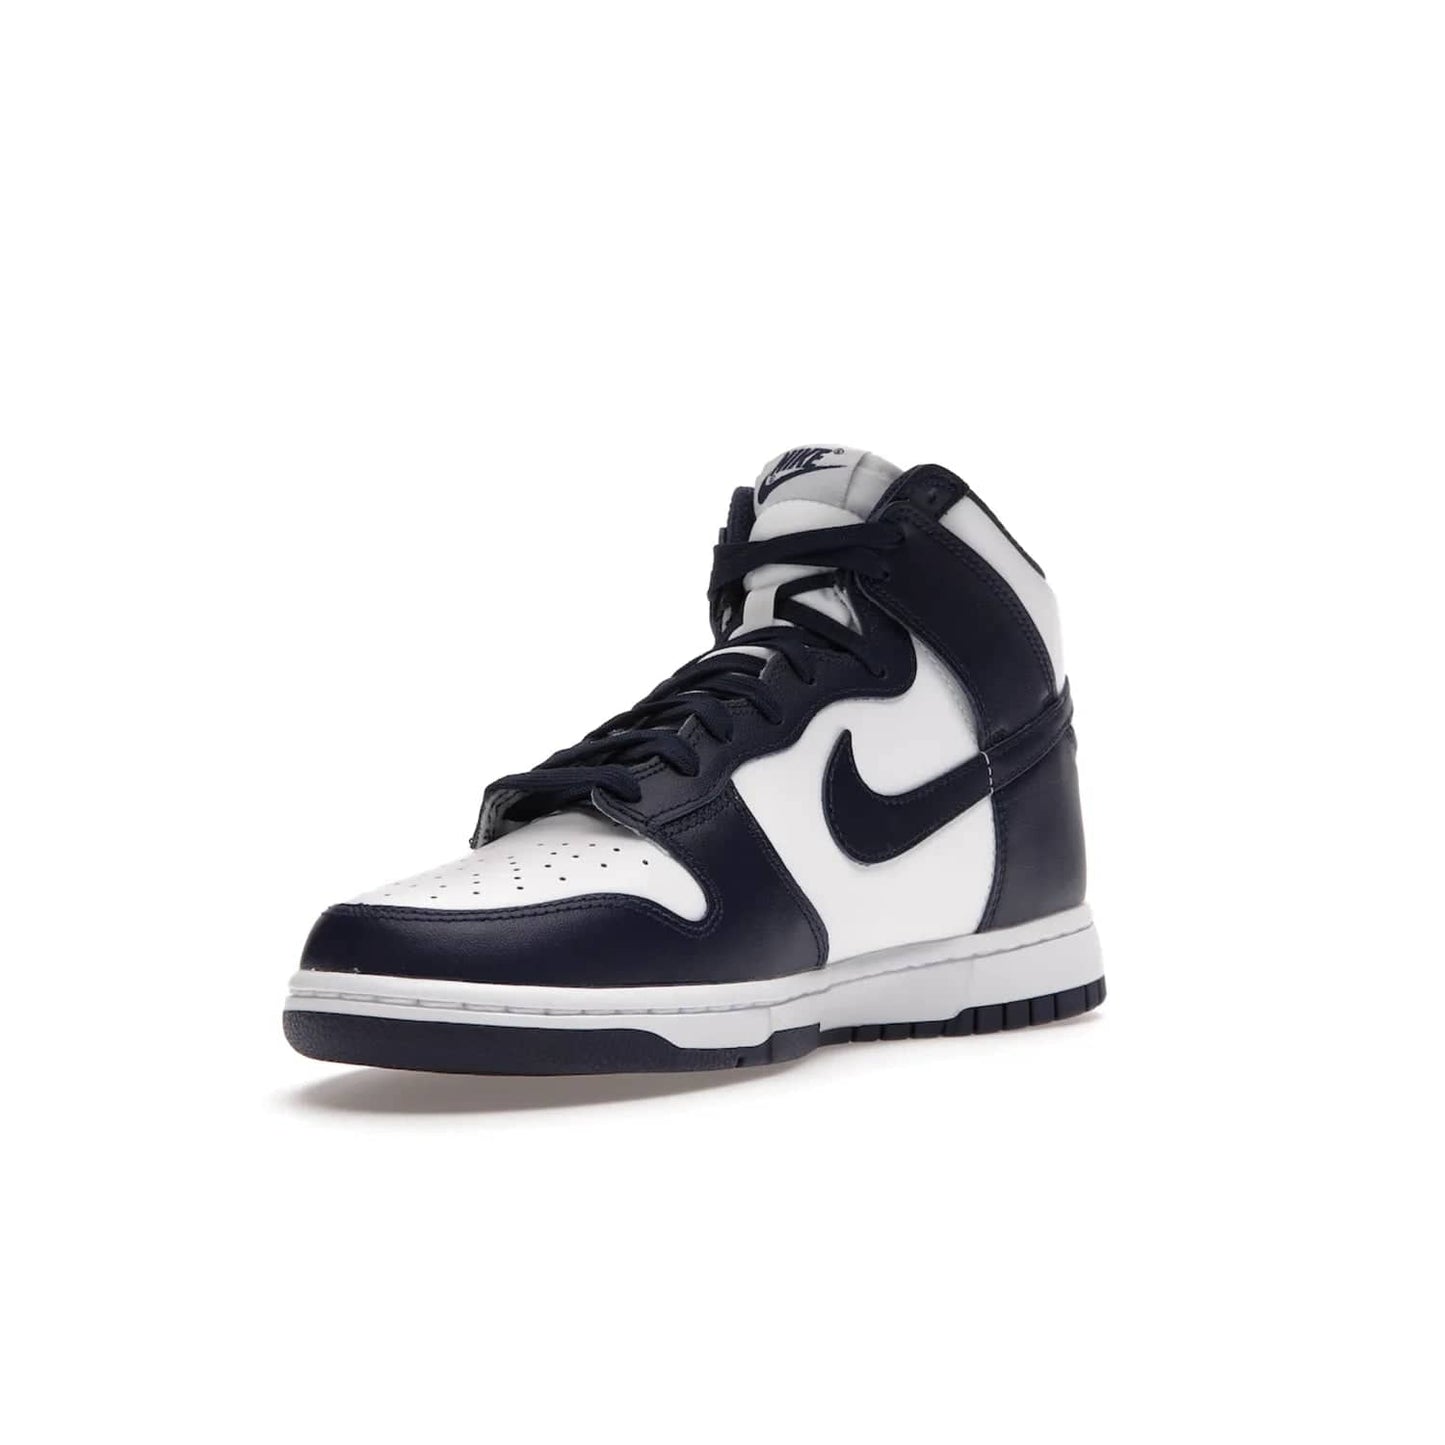 Nike Dunk High Championship Navy - Image 14 - Only at www.BallersClubKickz.com - Classic Nike Dunk High sneaker delivers an unforgettable style with white leather upper, Championship Navy overlays, and matching woven tongue label and sole. Make a statement with the Championship Navy today.